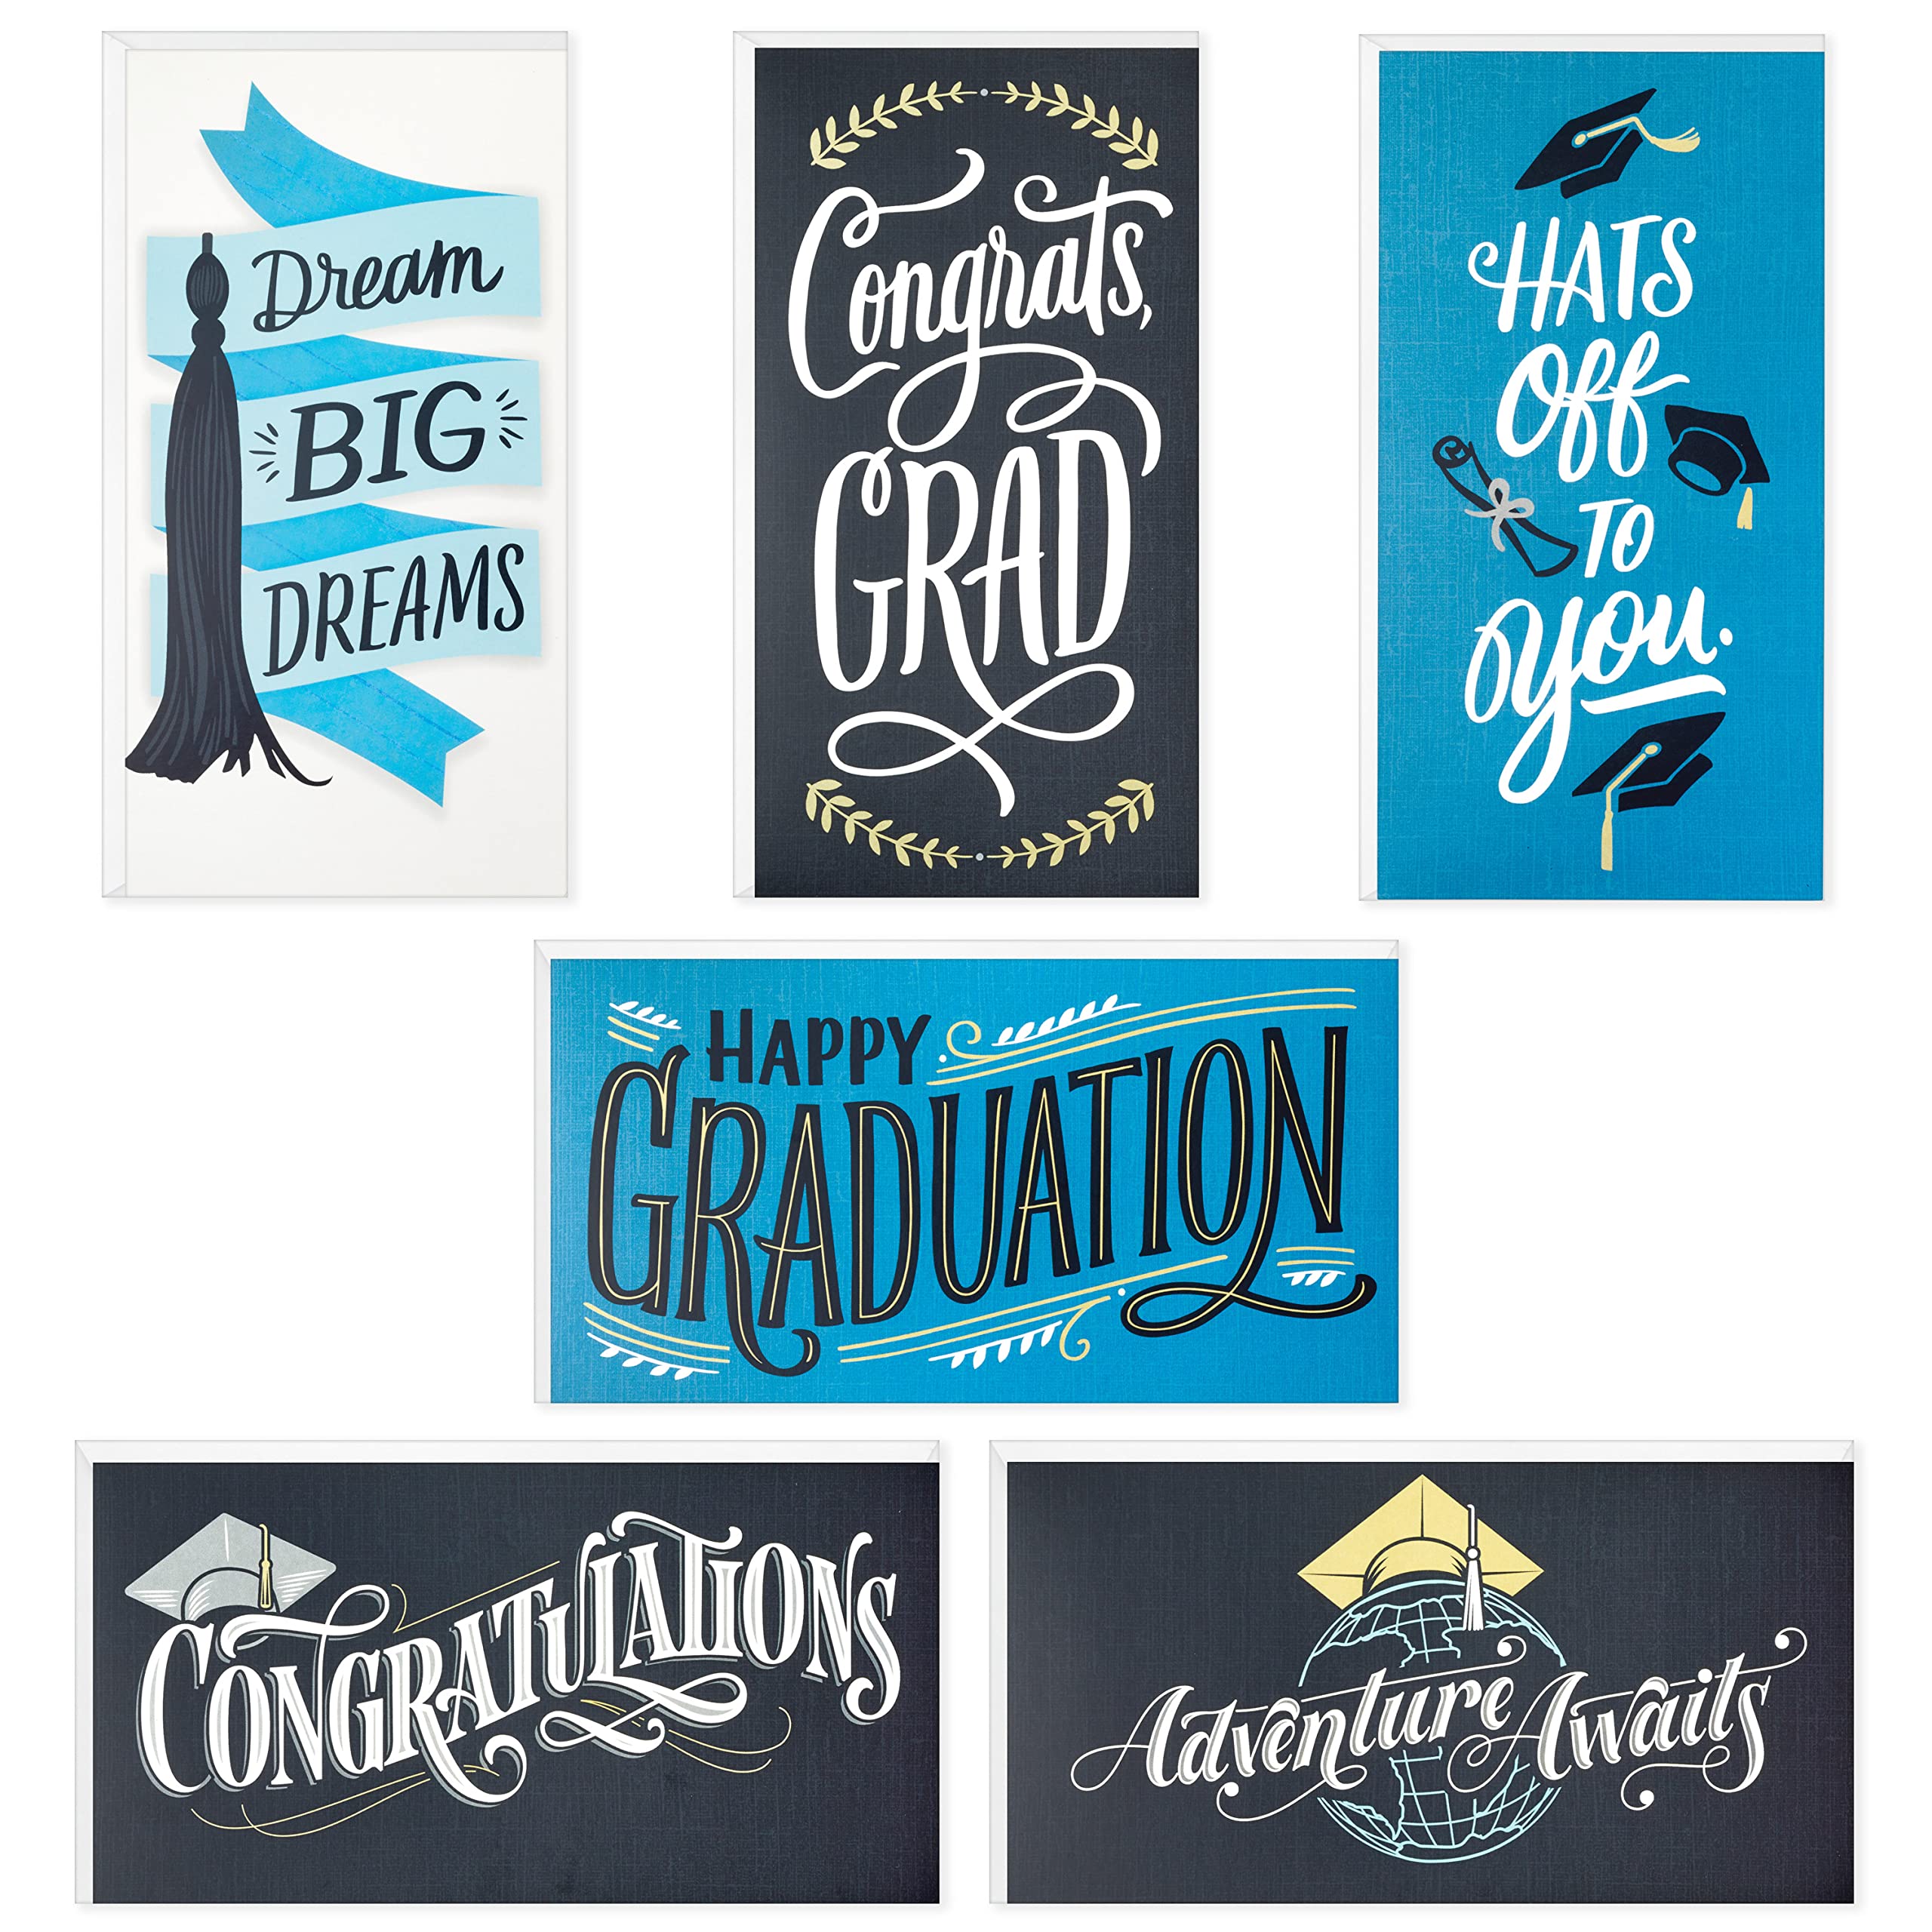 Hallmark Graduation Money Holders or Gift Card Holders Assortment with Envelopes, Hats Off (36 Cards and Envelopes)